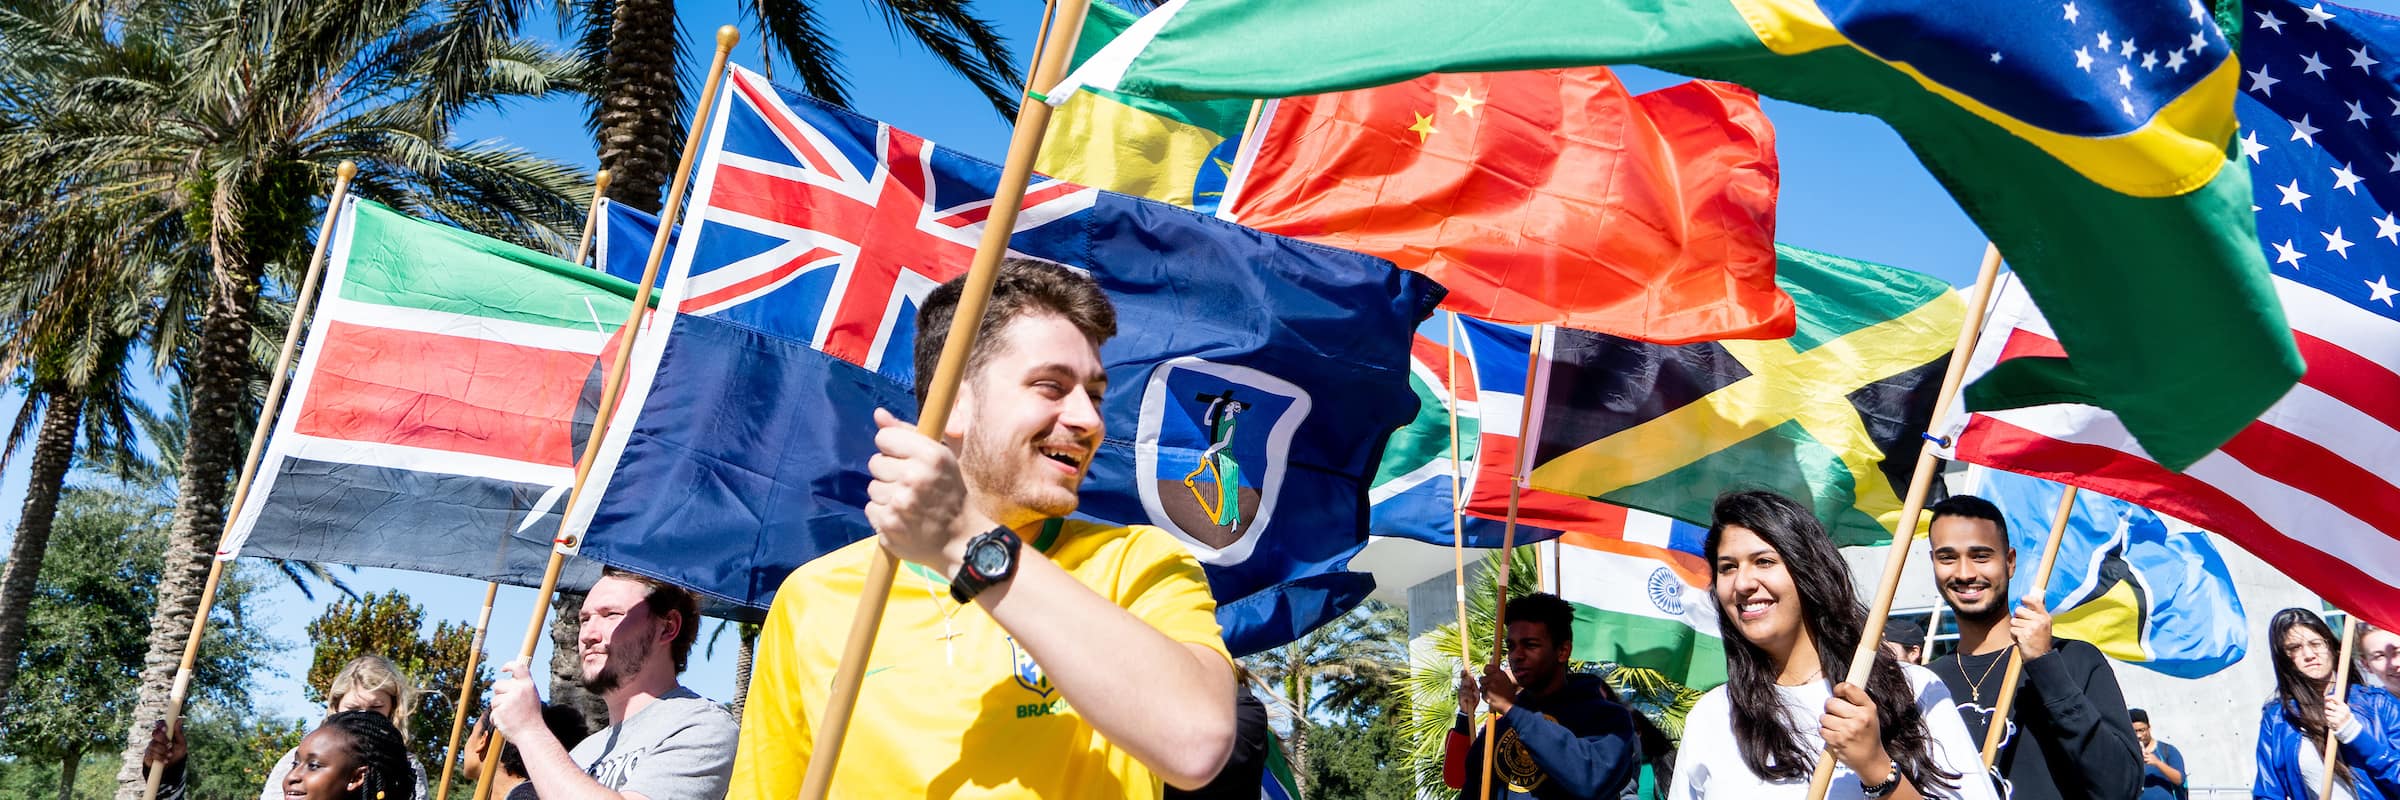 Embry-Riddle Aeronautical University students celebrated the start of International Education Week with a Flag Parade from the Henderson Welcome Center to the Mori Hosseini Student Union at the Daytona Beach Campus on Nov. 18, 2019. (Embry-Riddle/Paige Wilson)